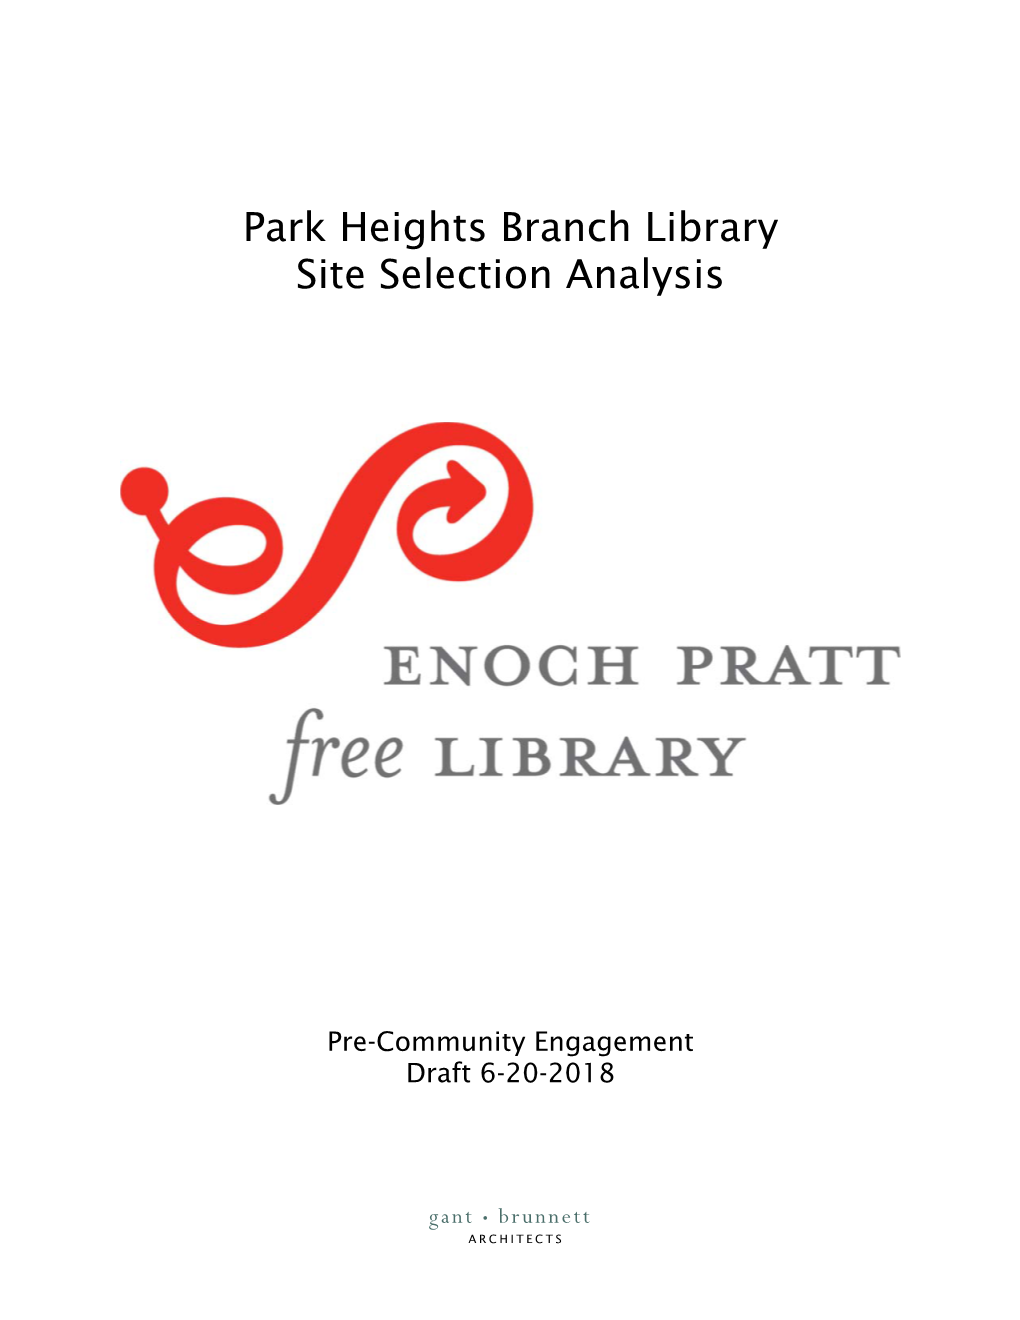 Park Heights Branch Library Site Selection Analysis